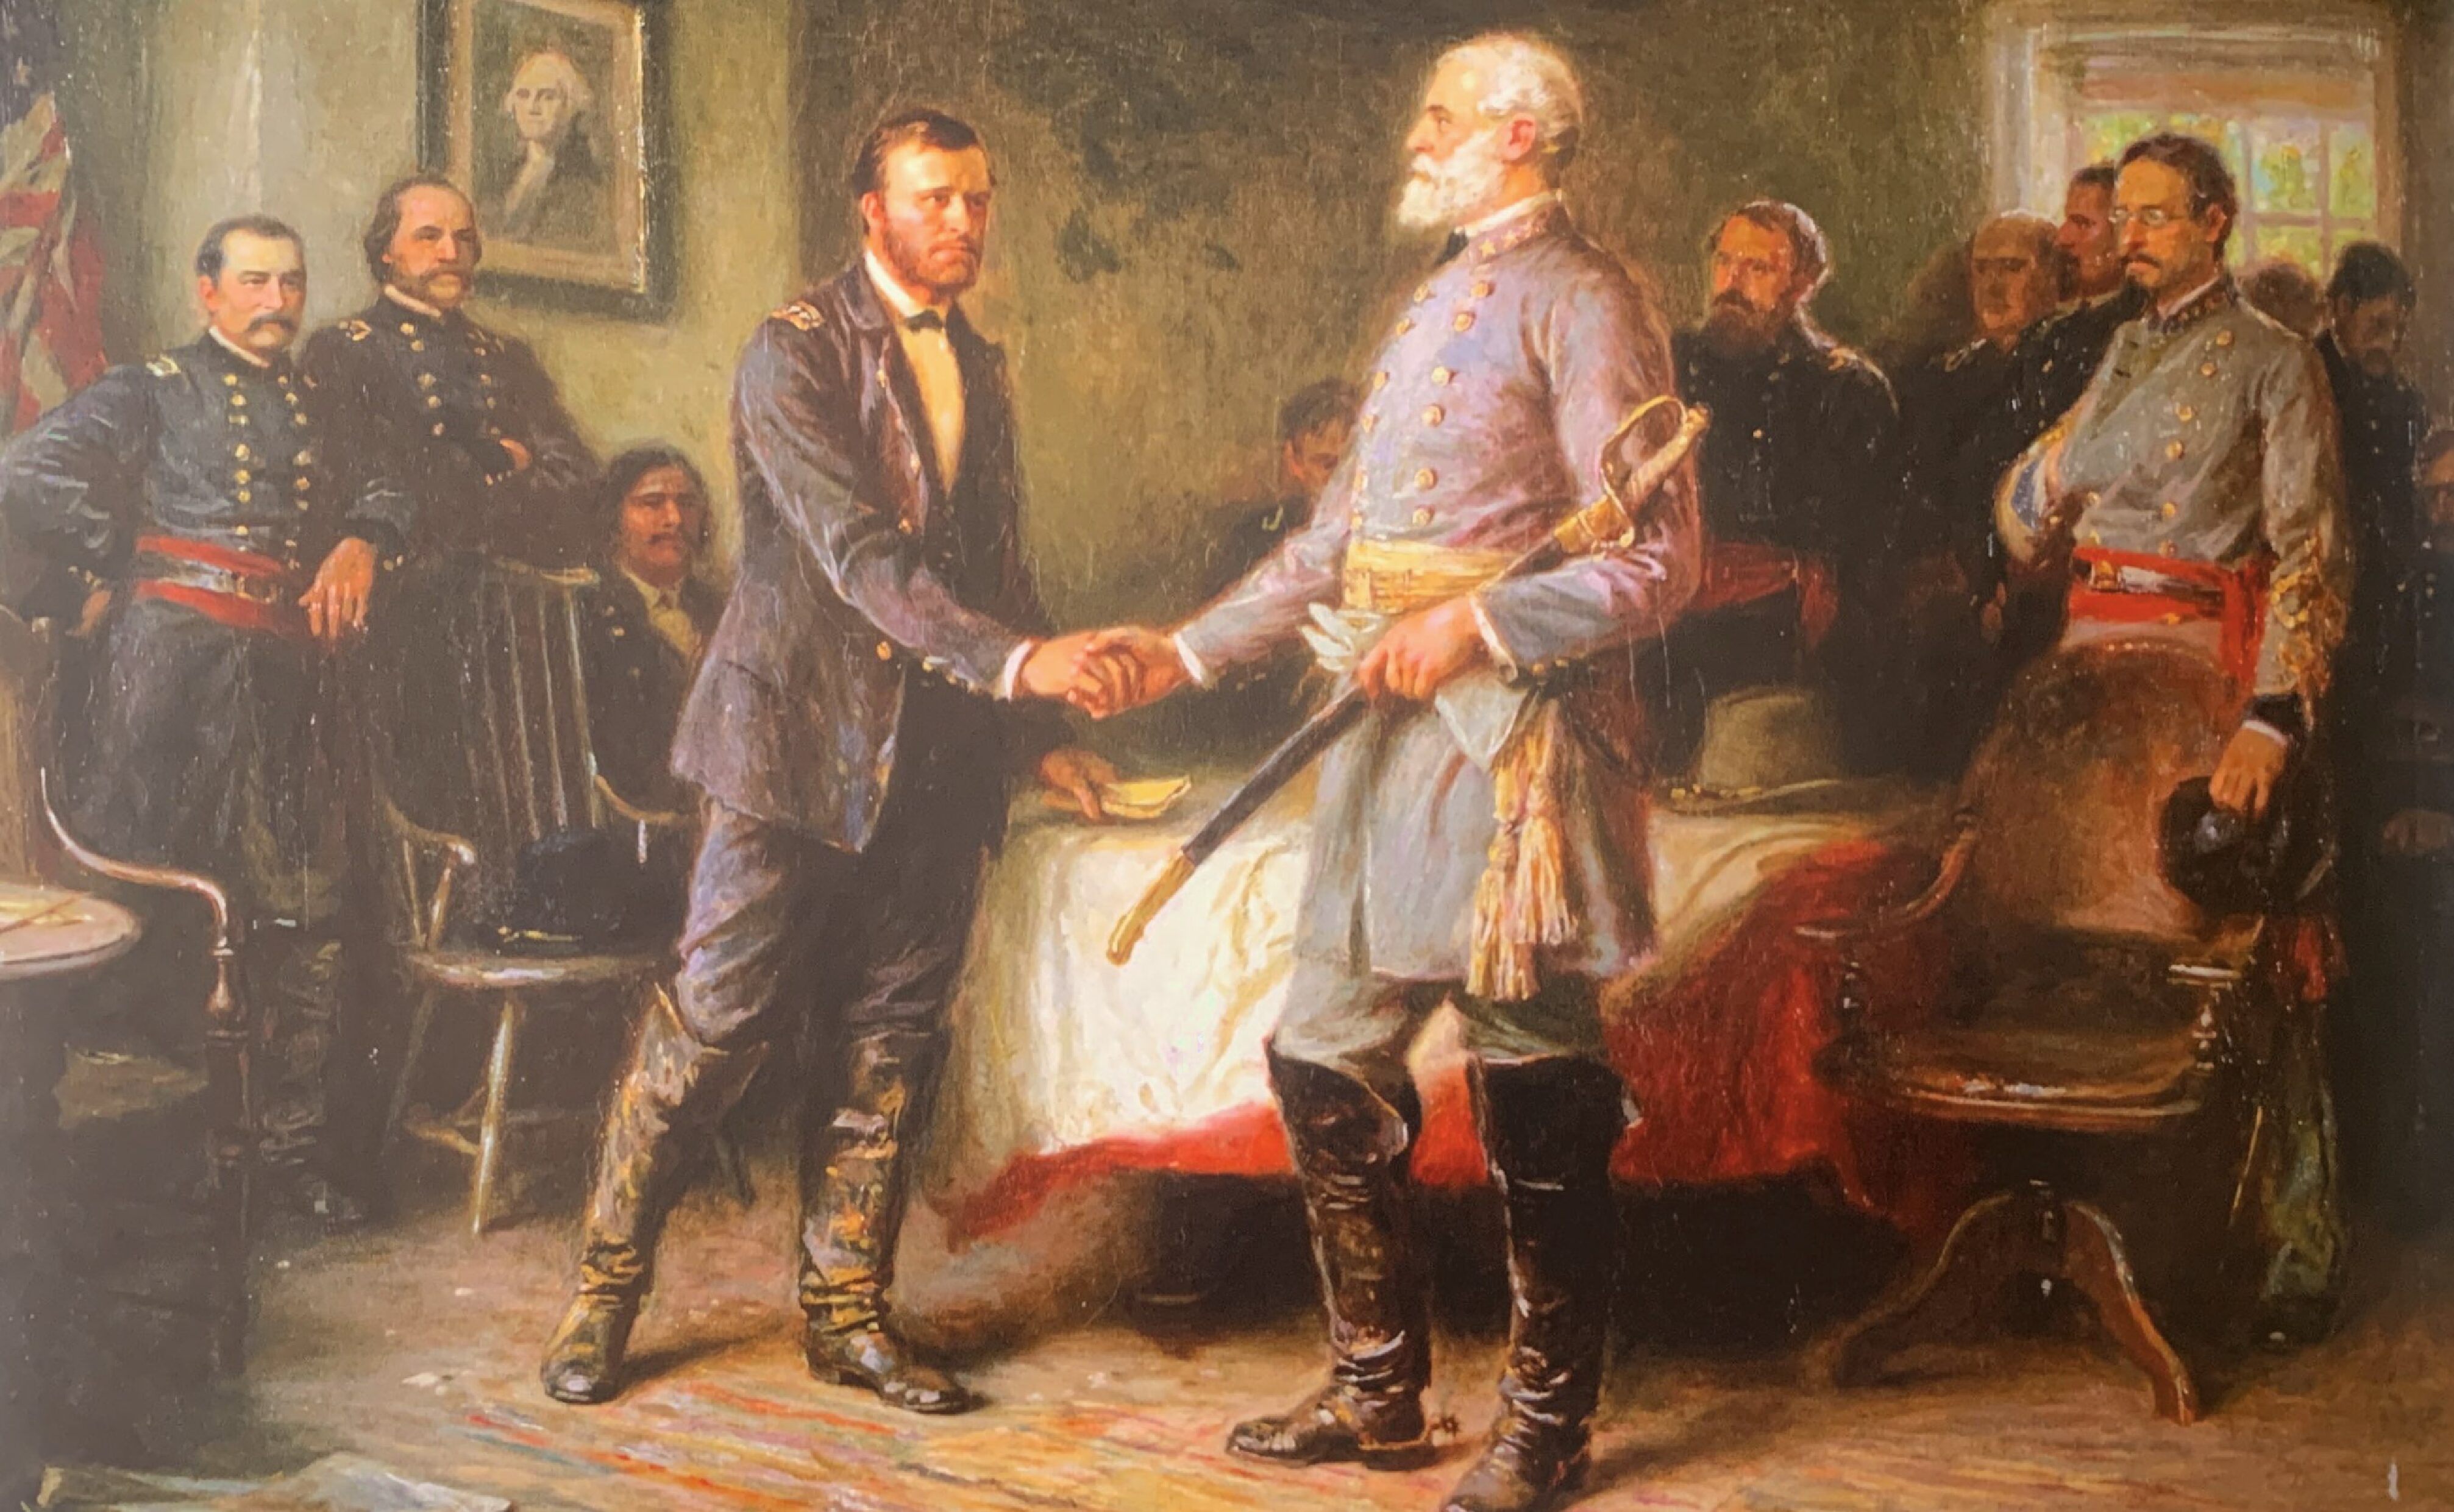 Common Bonds: The Duty and Honor of Lee and Grant | The National Endowment  for the Humanities